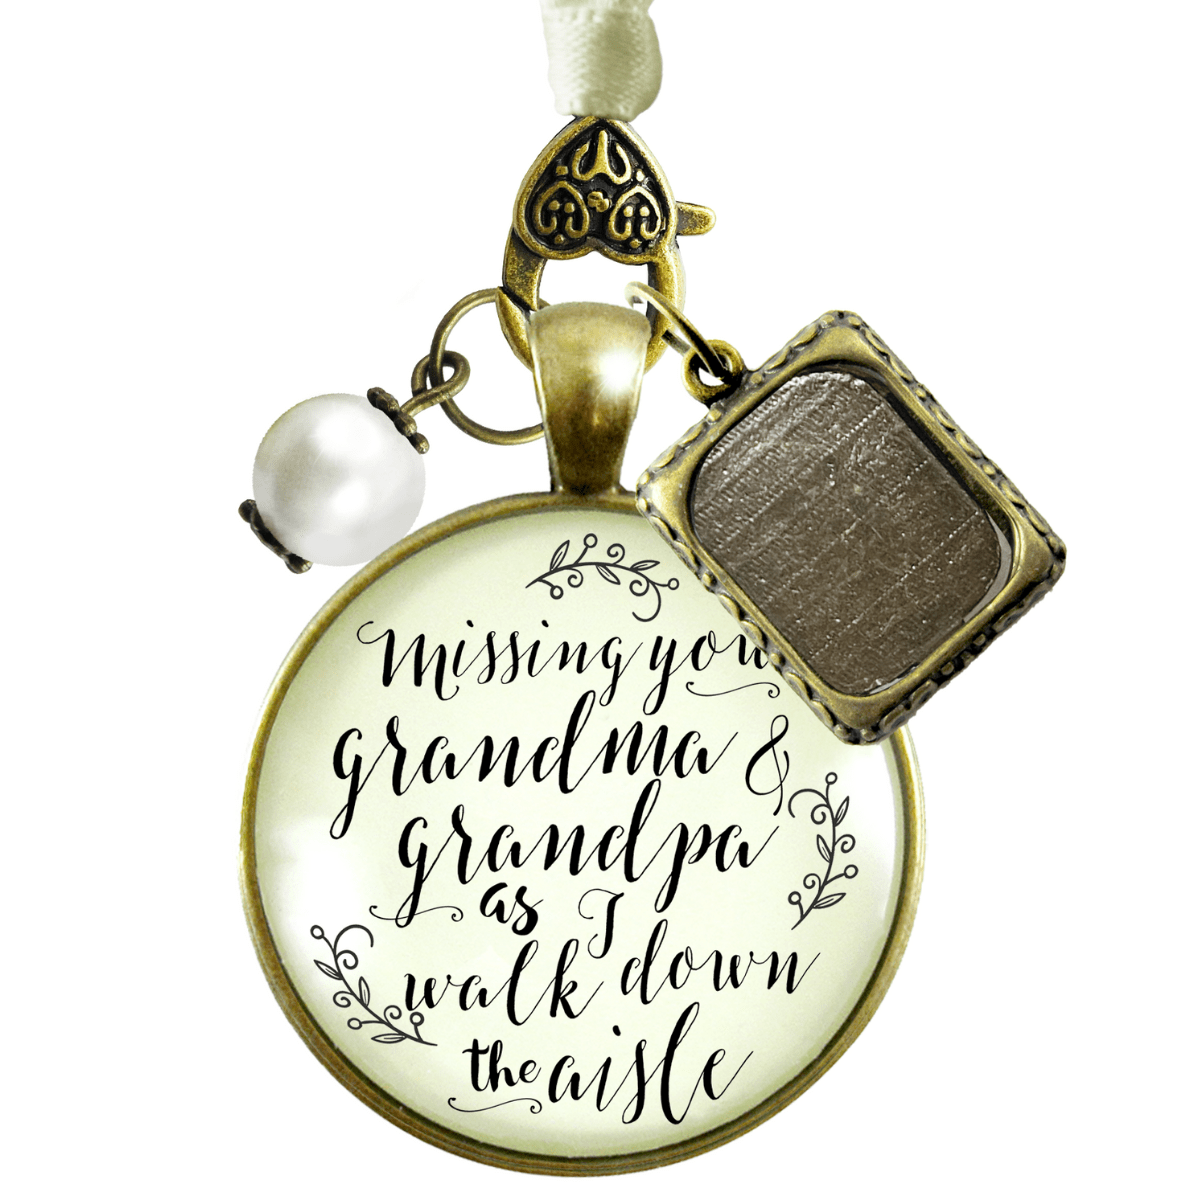 Bouquet Charm Bridal Memorial Grandma And Grandpa Miss You Wedding Day Vintage Bronze Picture Frame - Gutsy Goodness Handmade Jewelry Gifts